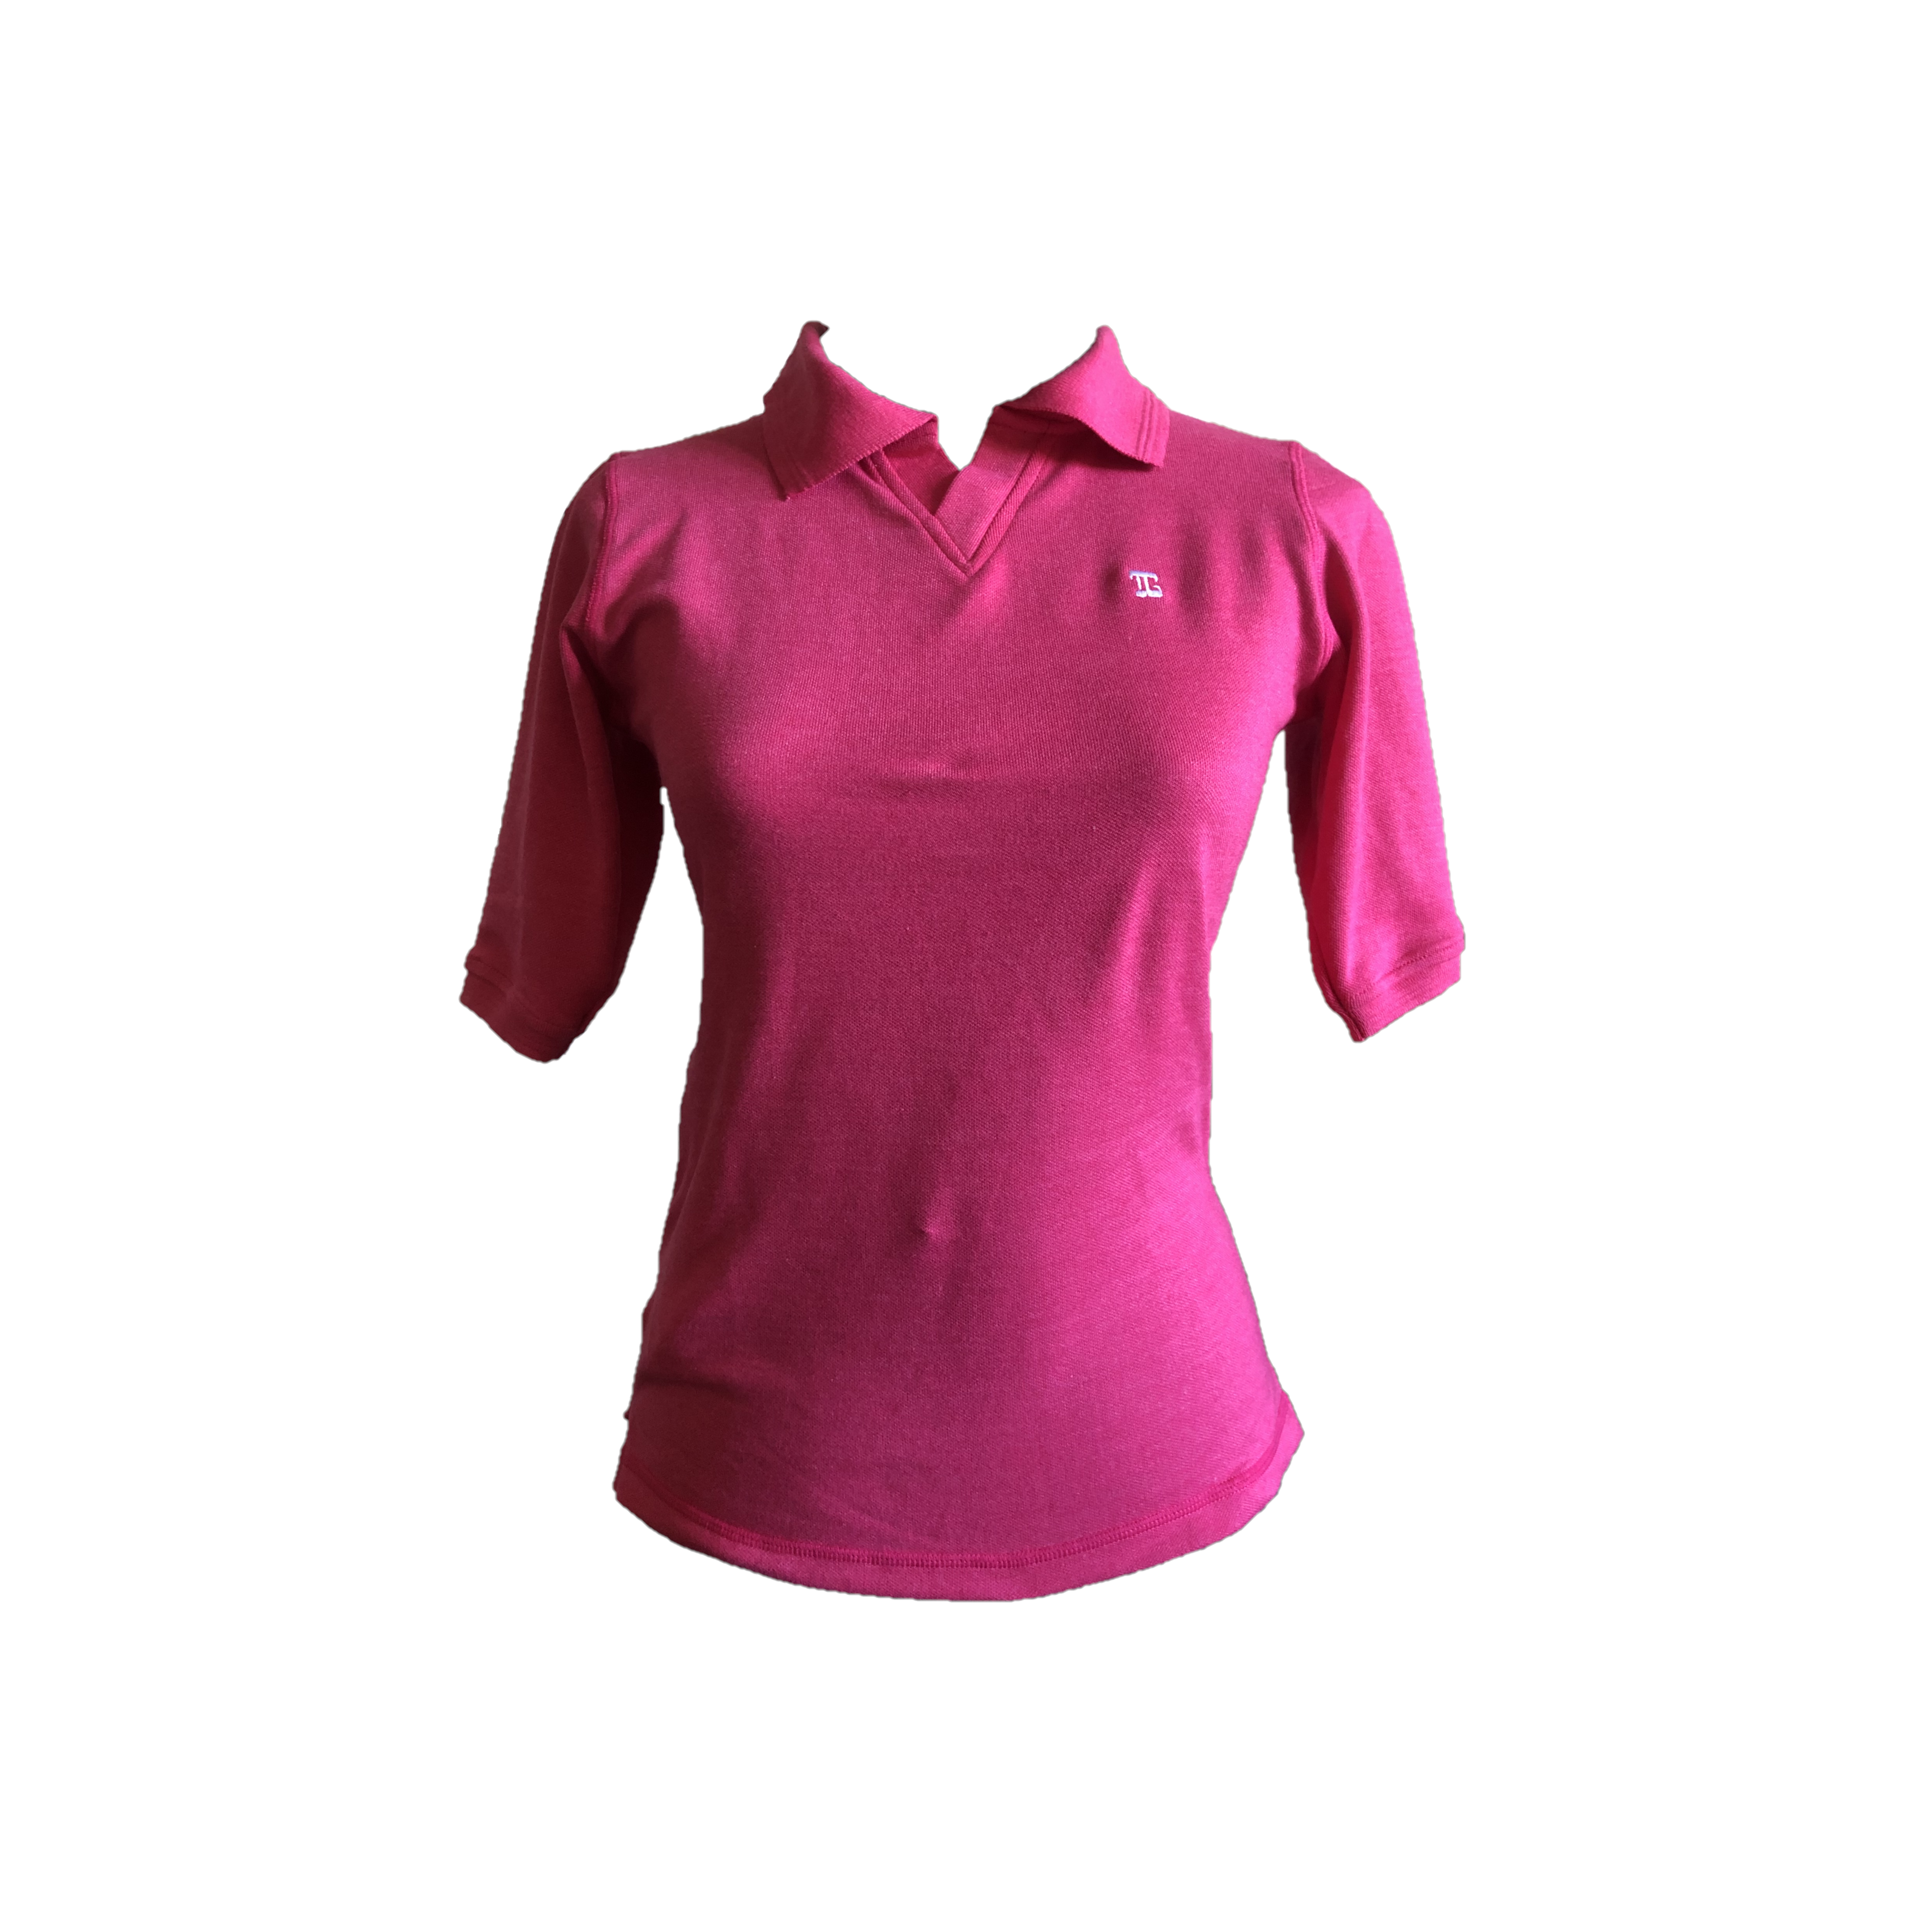 LT-106 || Ladies Top Raspberry Pink Textured Cloth Elbow Length Sleeve V Neck With Collar Rear V Overlock Stitched Saddle.